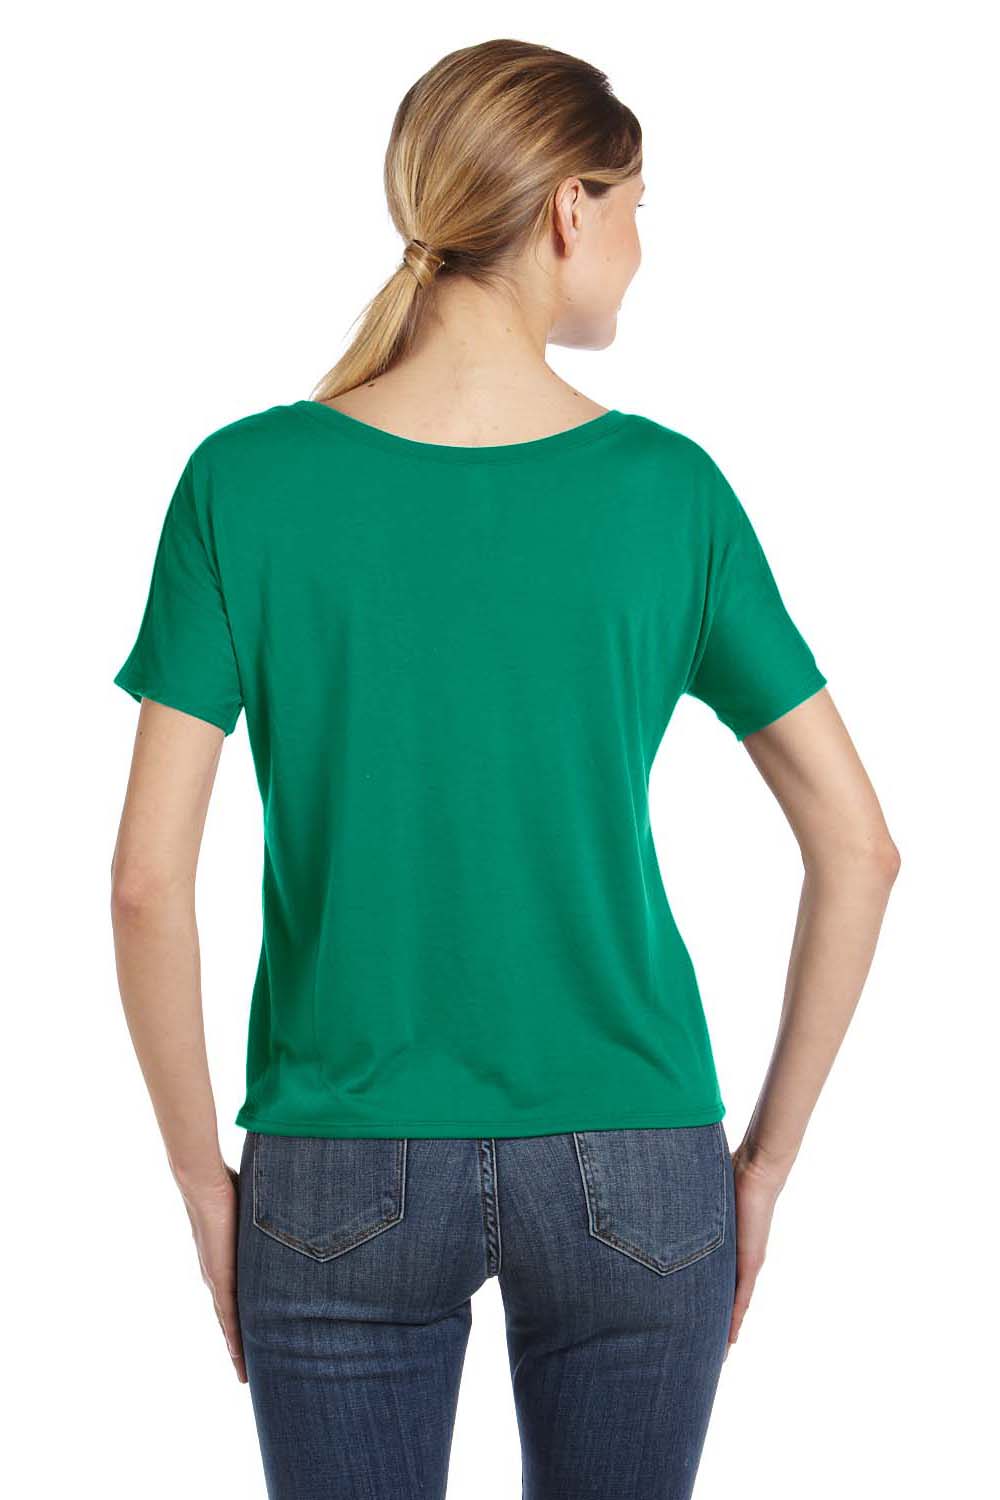 Bella + Canvas 8816 Womens Slouchy Short Sleeve Wide Neck T-Shirt Kelly Green Back